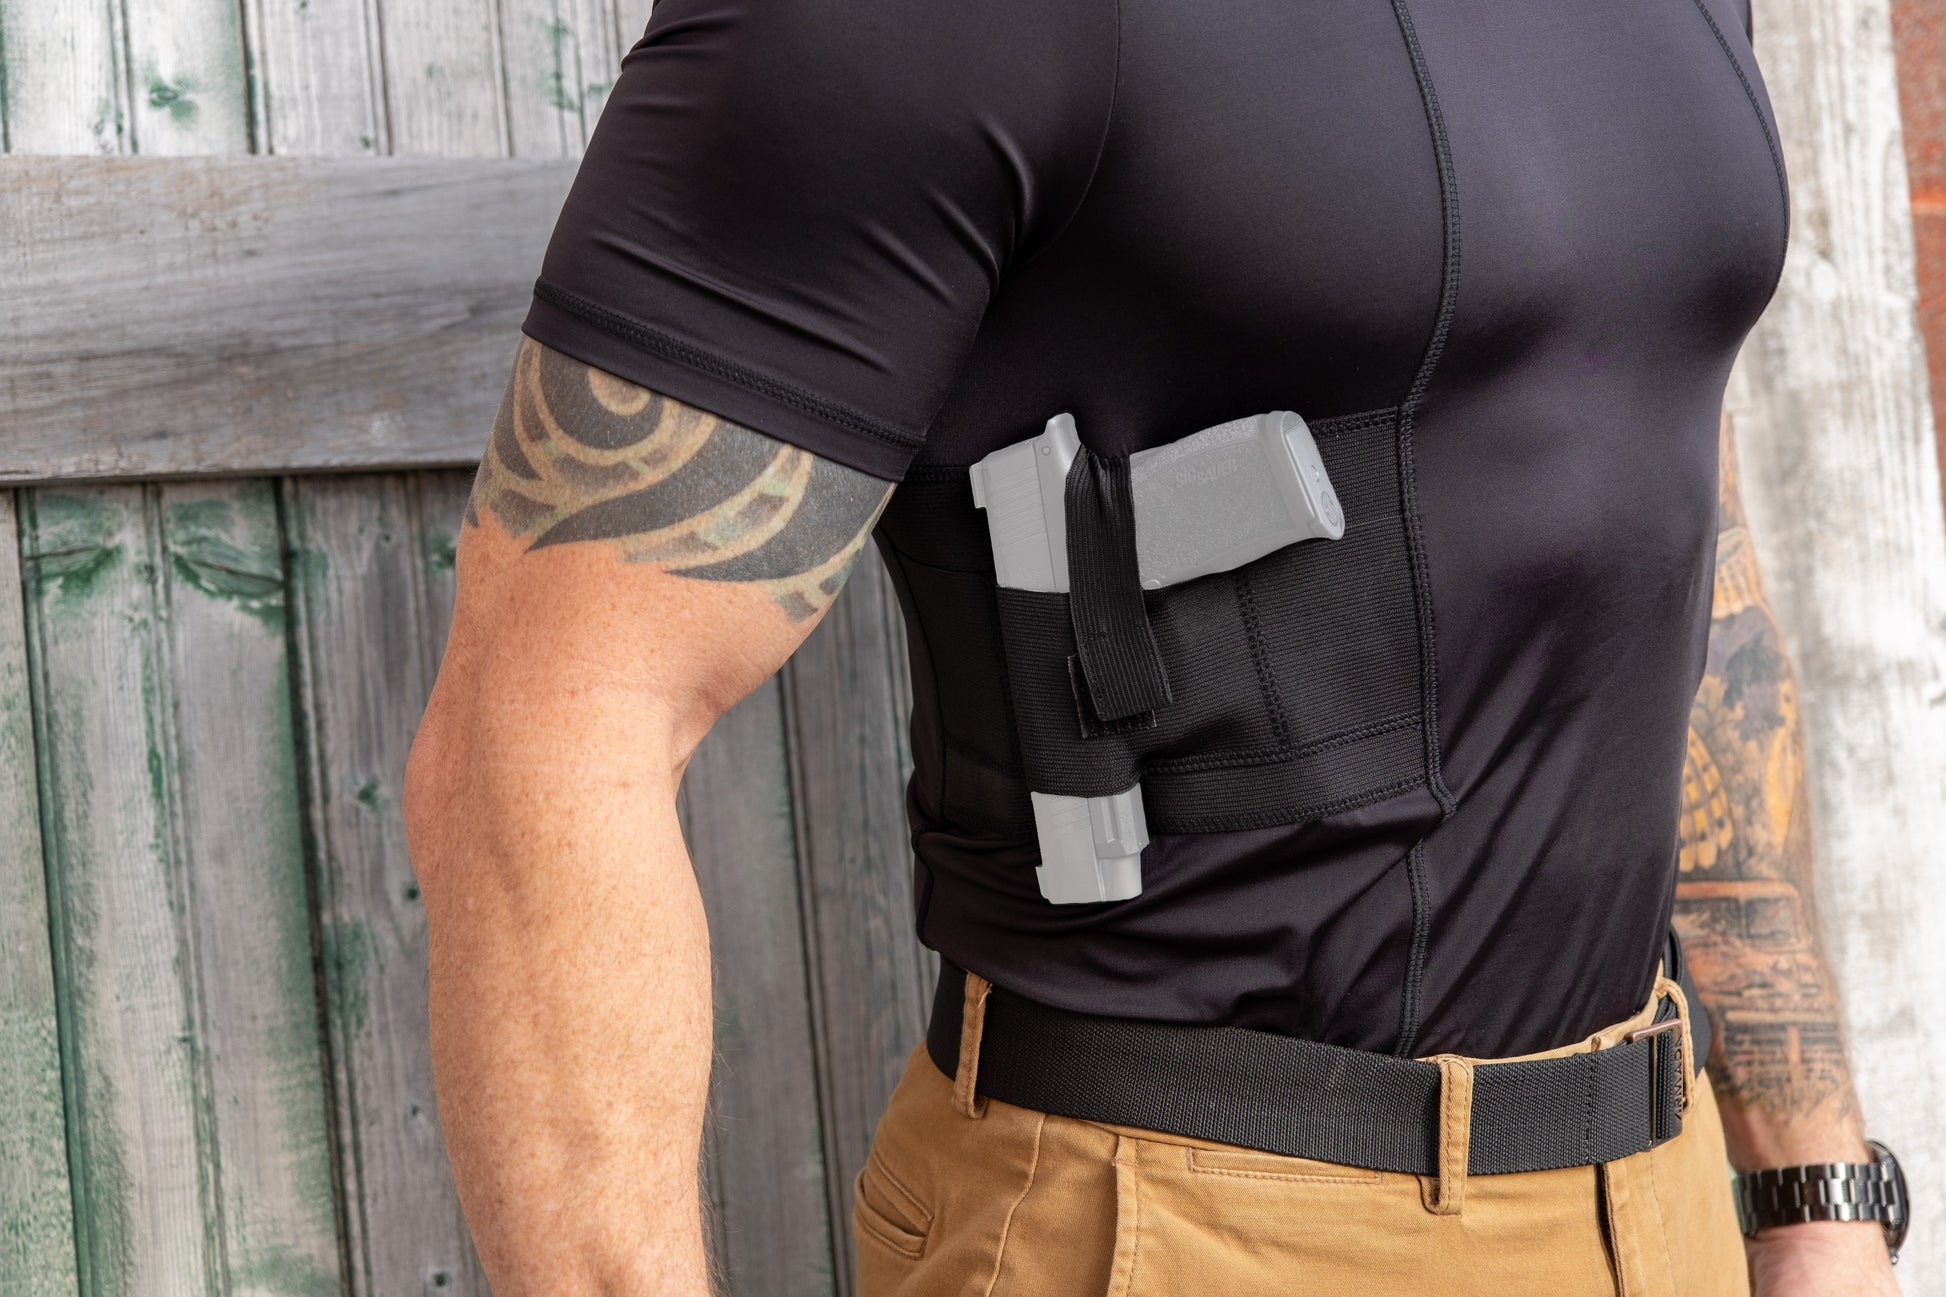  GrayStone Holster Tank Top Shirt Concealed Carry Clothing For  Men - Easy Reach Gun Concealment Compression CCW Vest Tactical Clothes,  Black, Large : Sports & Outdoors